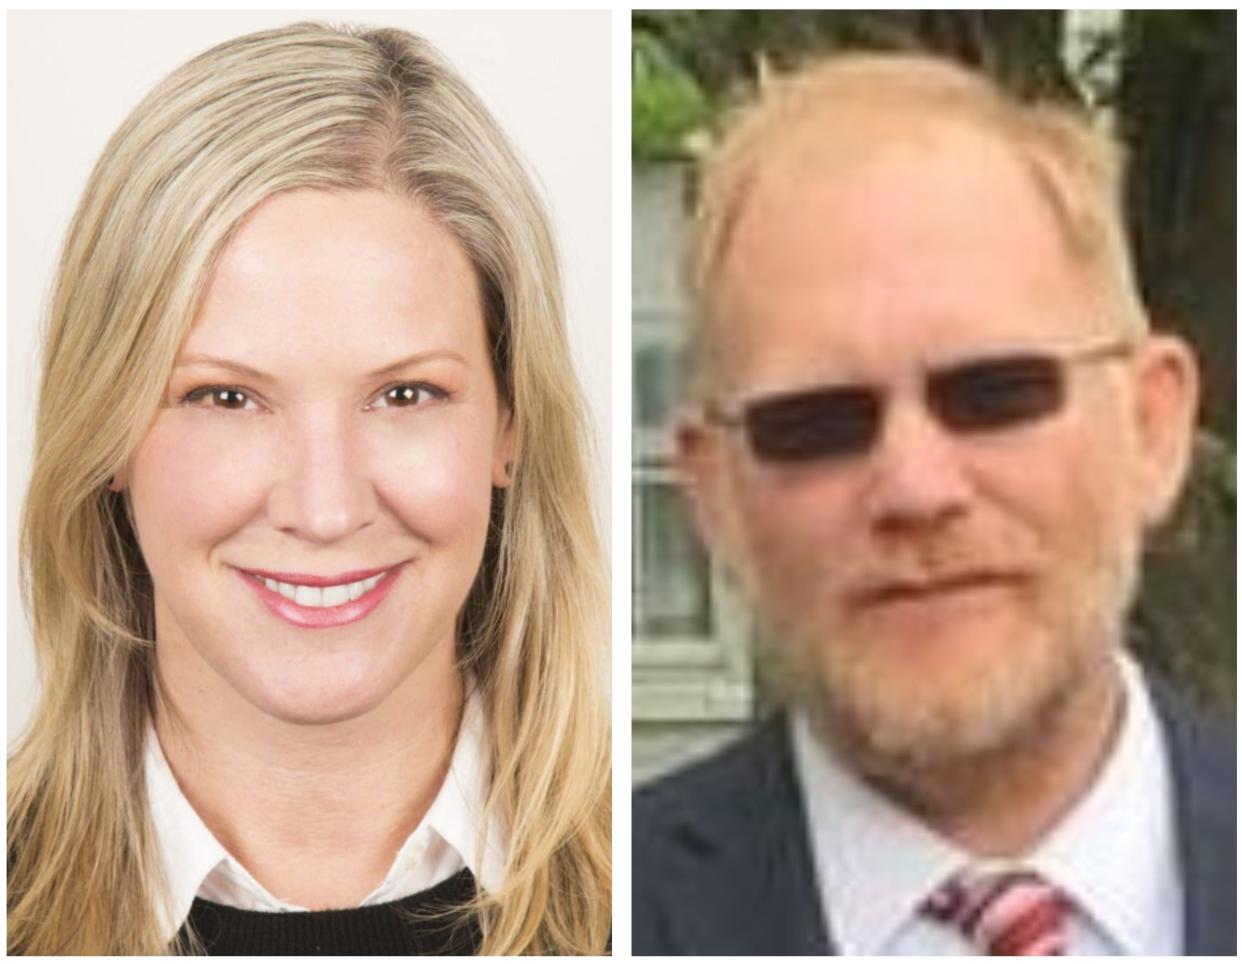 Erica de Vries, D-Hampton, is challenging Jason Janvrin, R-Seabrook, for the Rockingham County state House District 40 seat representing Hampton and Seabrook.